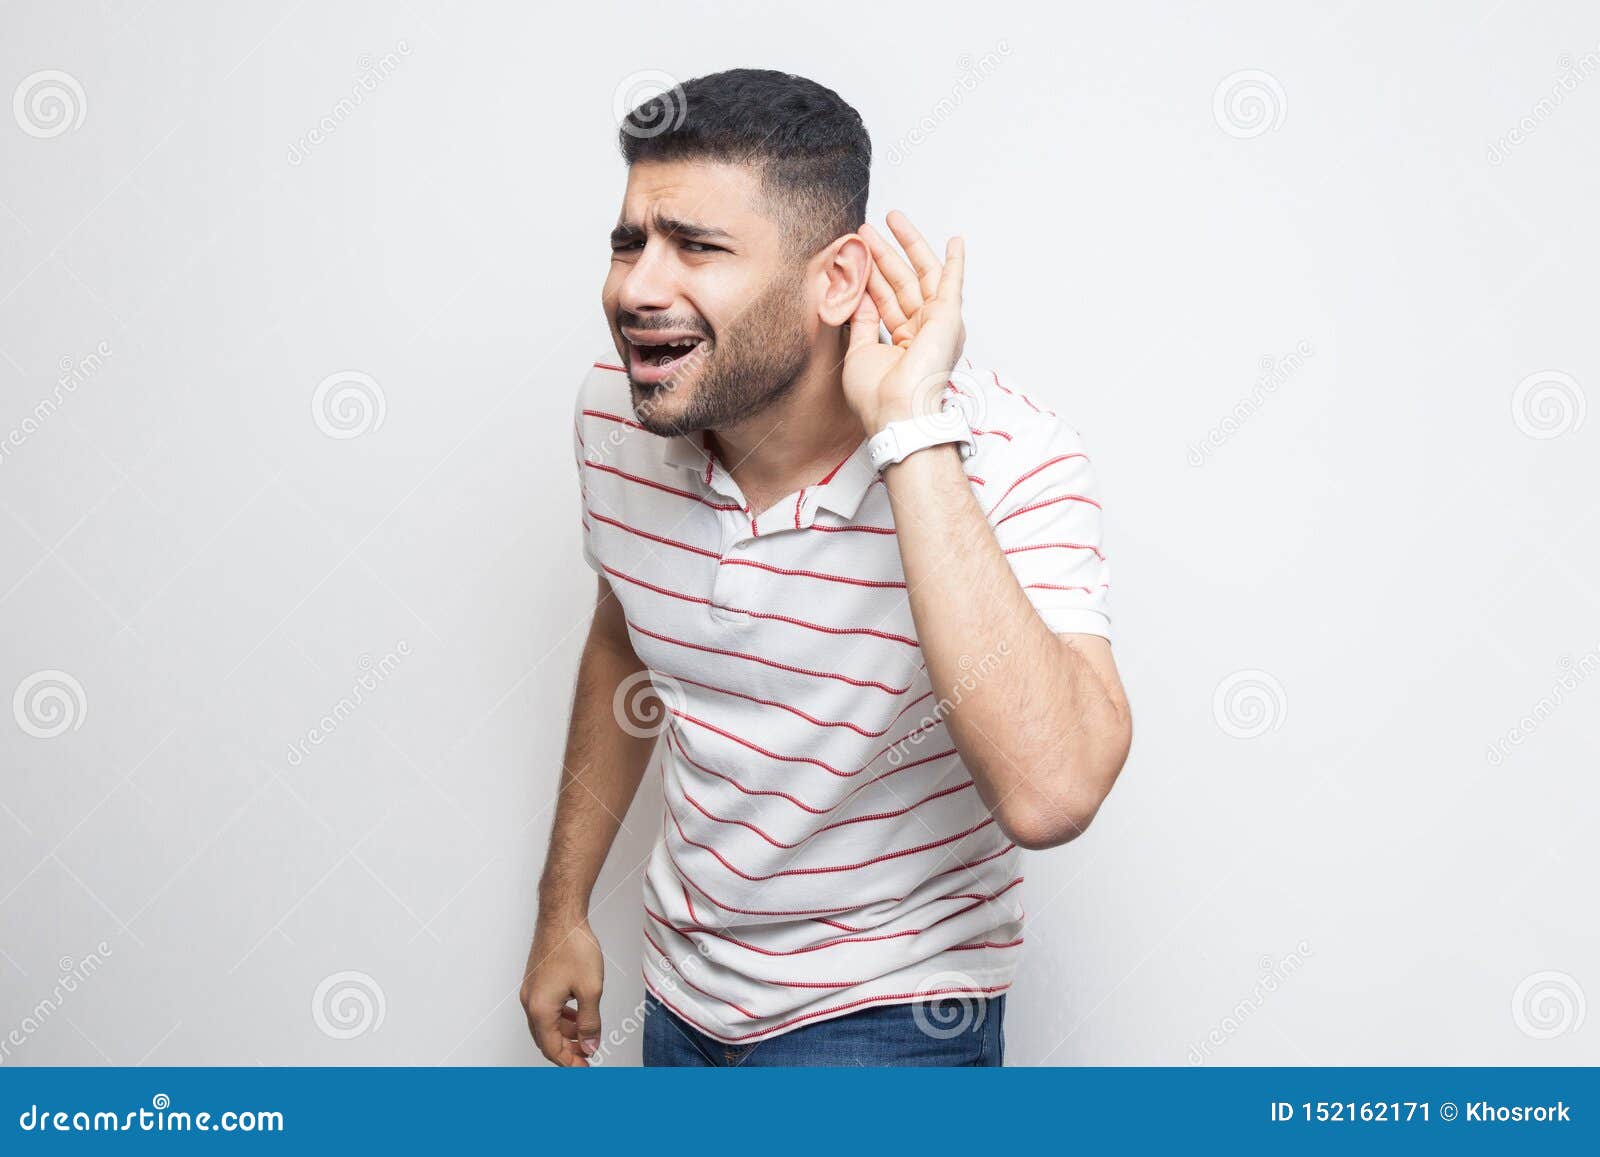 what? i can not hear you. portrait of attentive handsome bearded young man in striped t-shirt standing with hand on ear and want